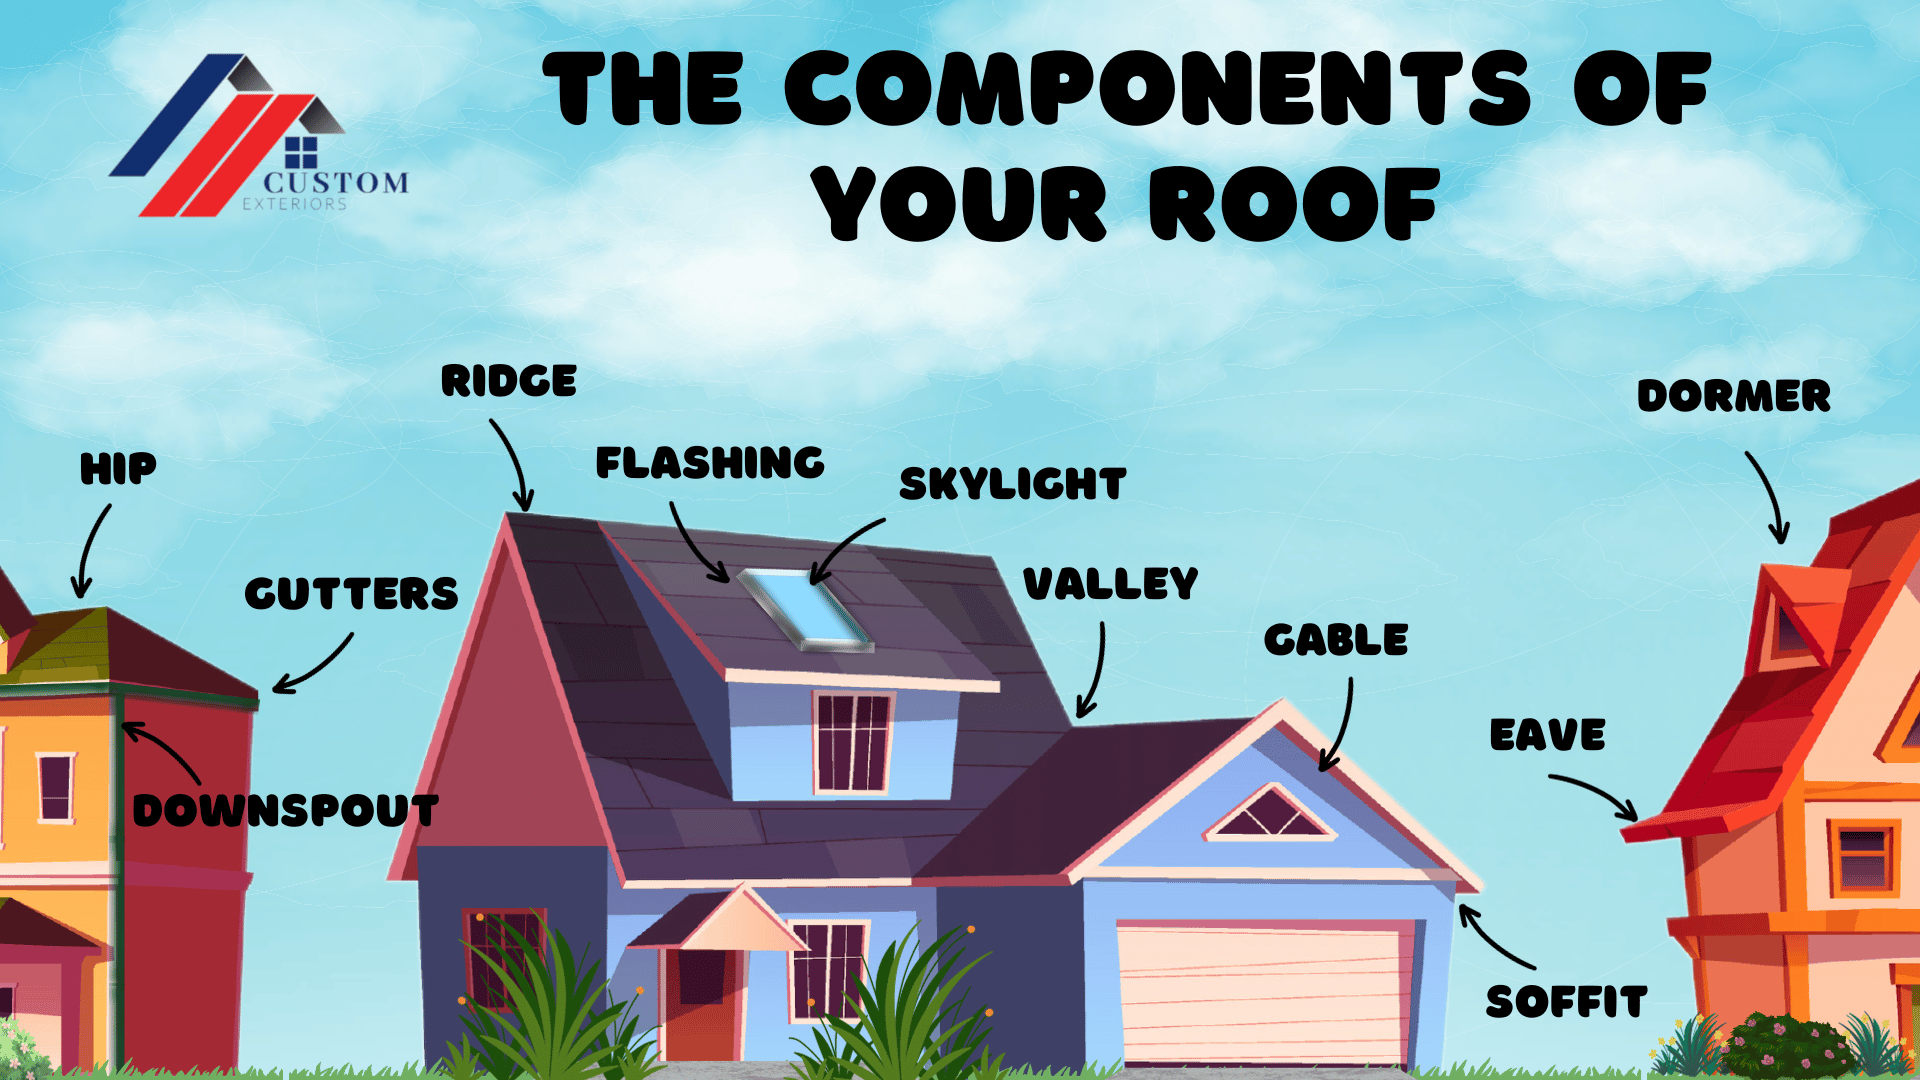 Customized infographic showing the components of a roof